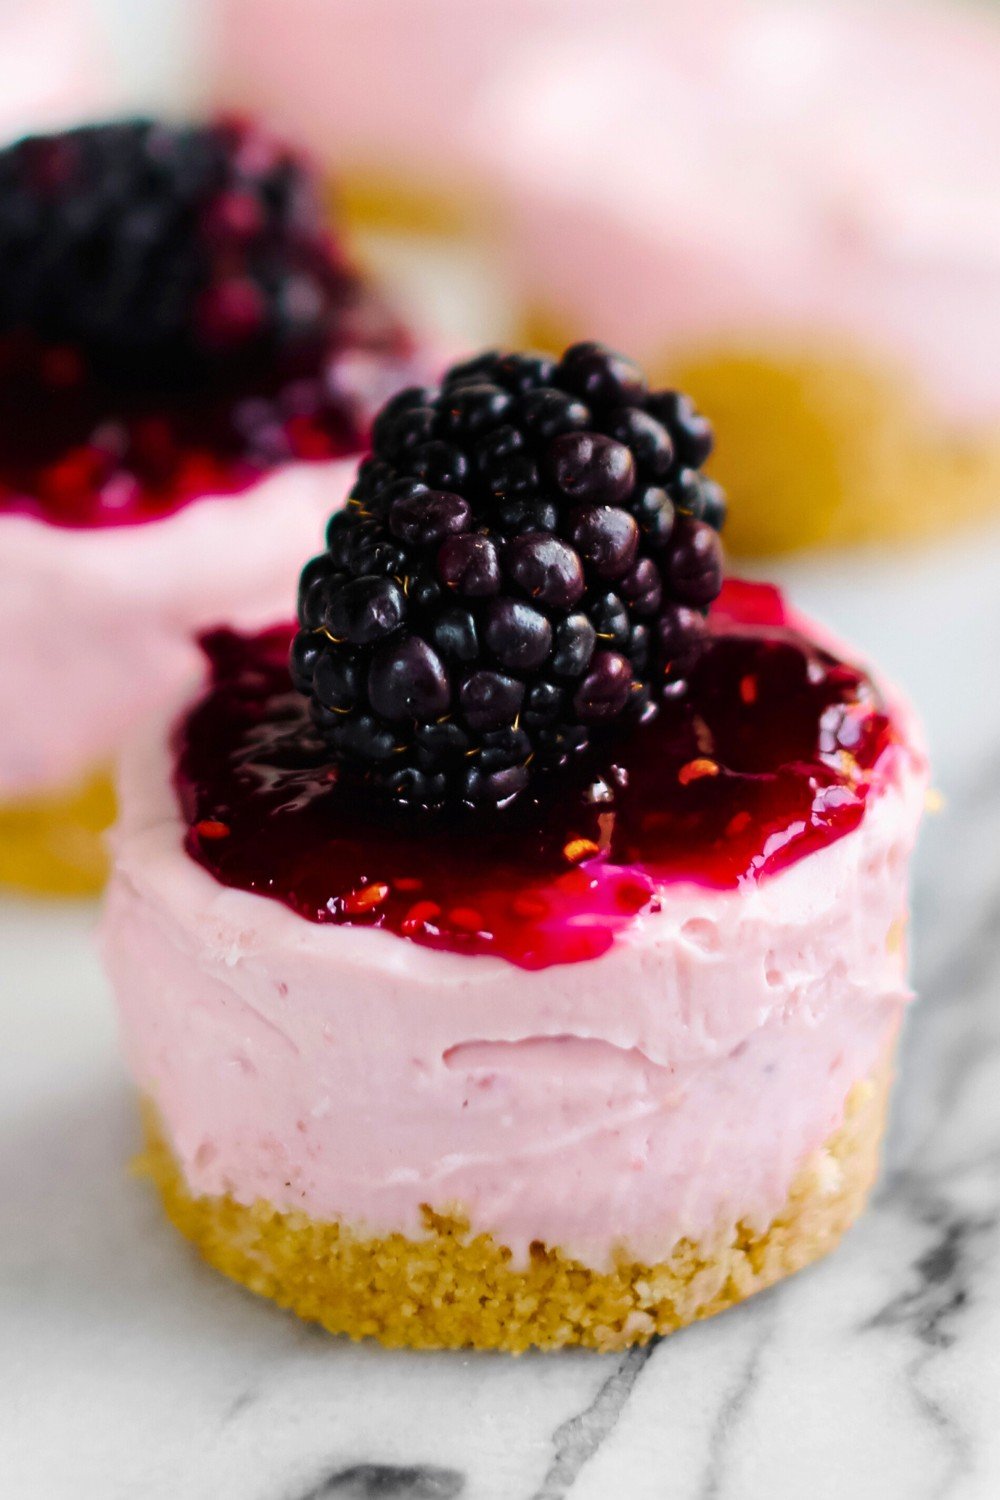 mini cheesecake topped with a blackberry sauce, garnished with a fresh blackberry on top.